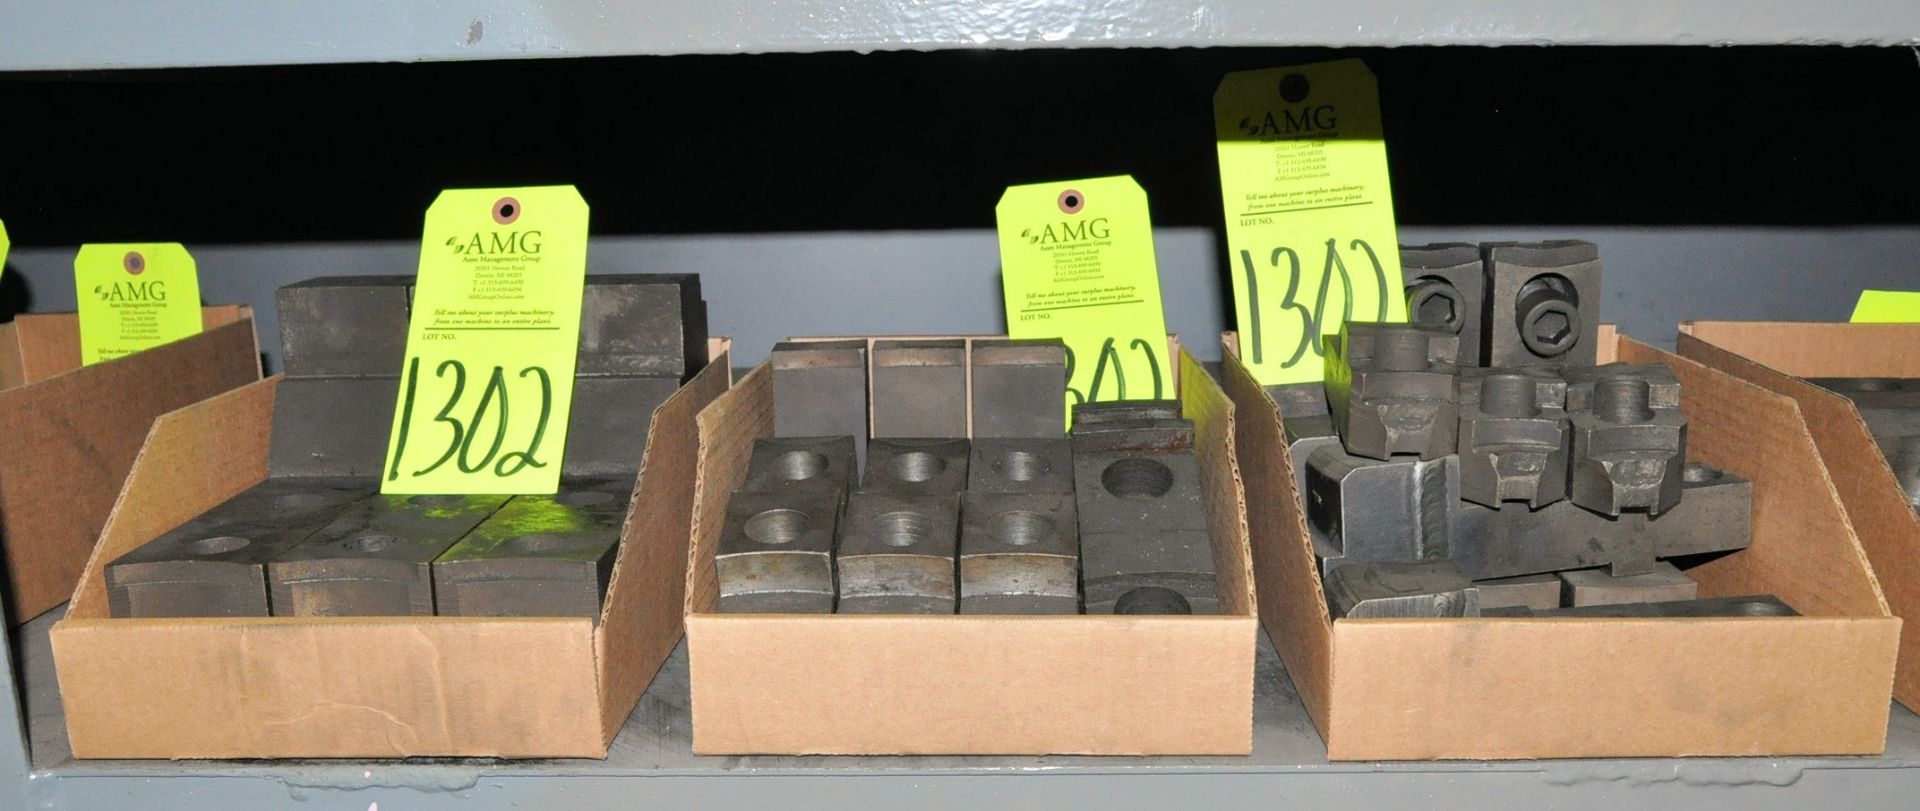 Lot-Chuck Jaws in (10) Boxes, (F-17), (Yellow Tag) - Image 2 of 3